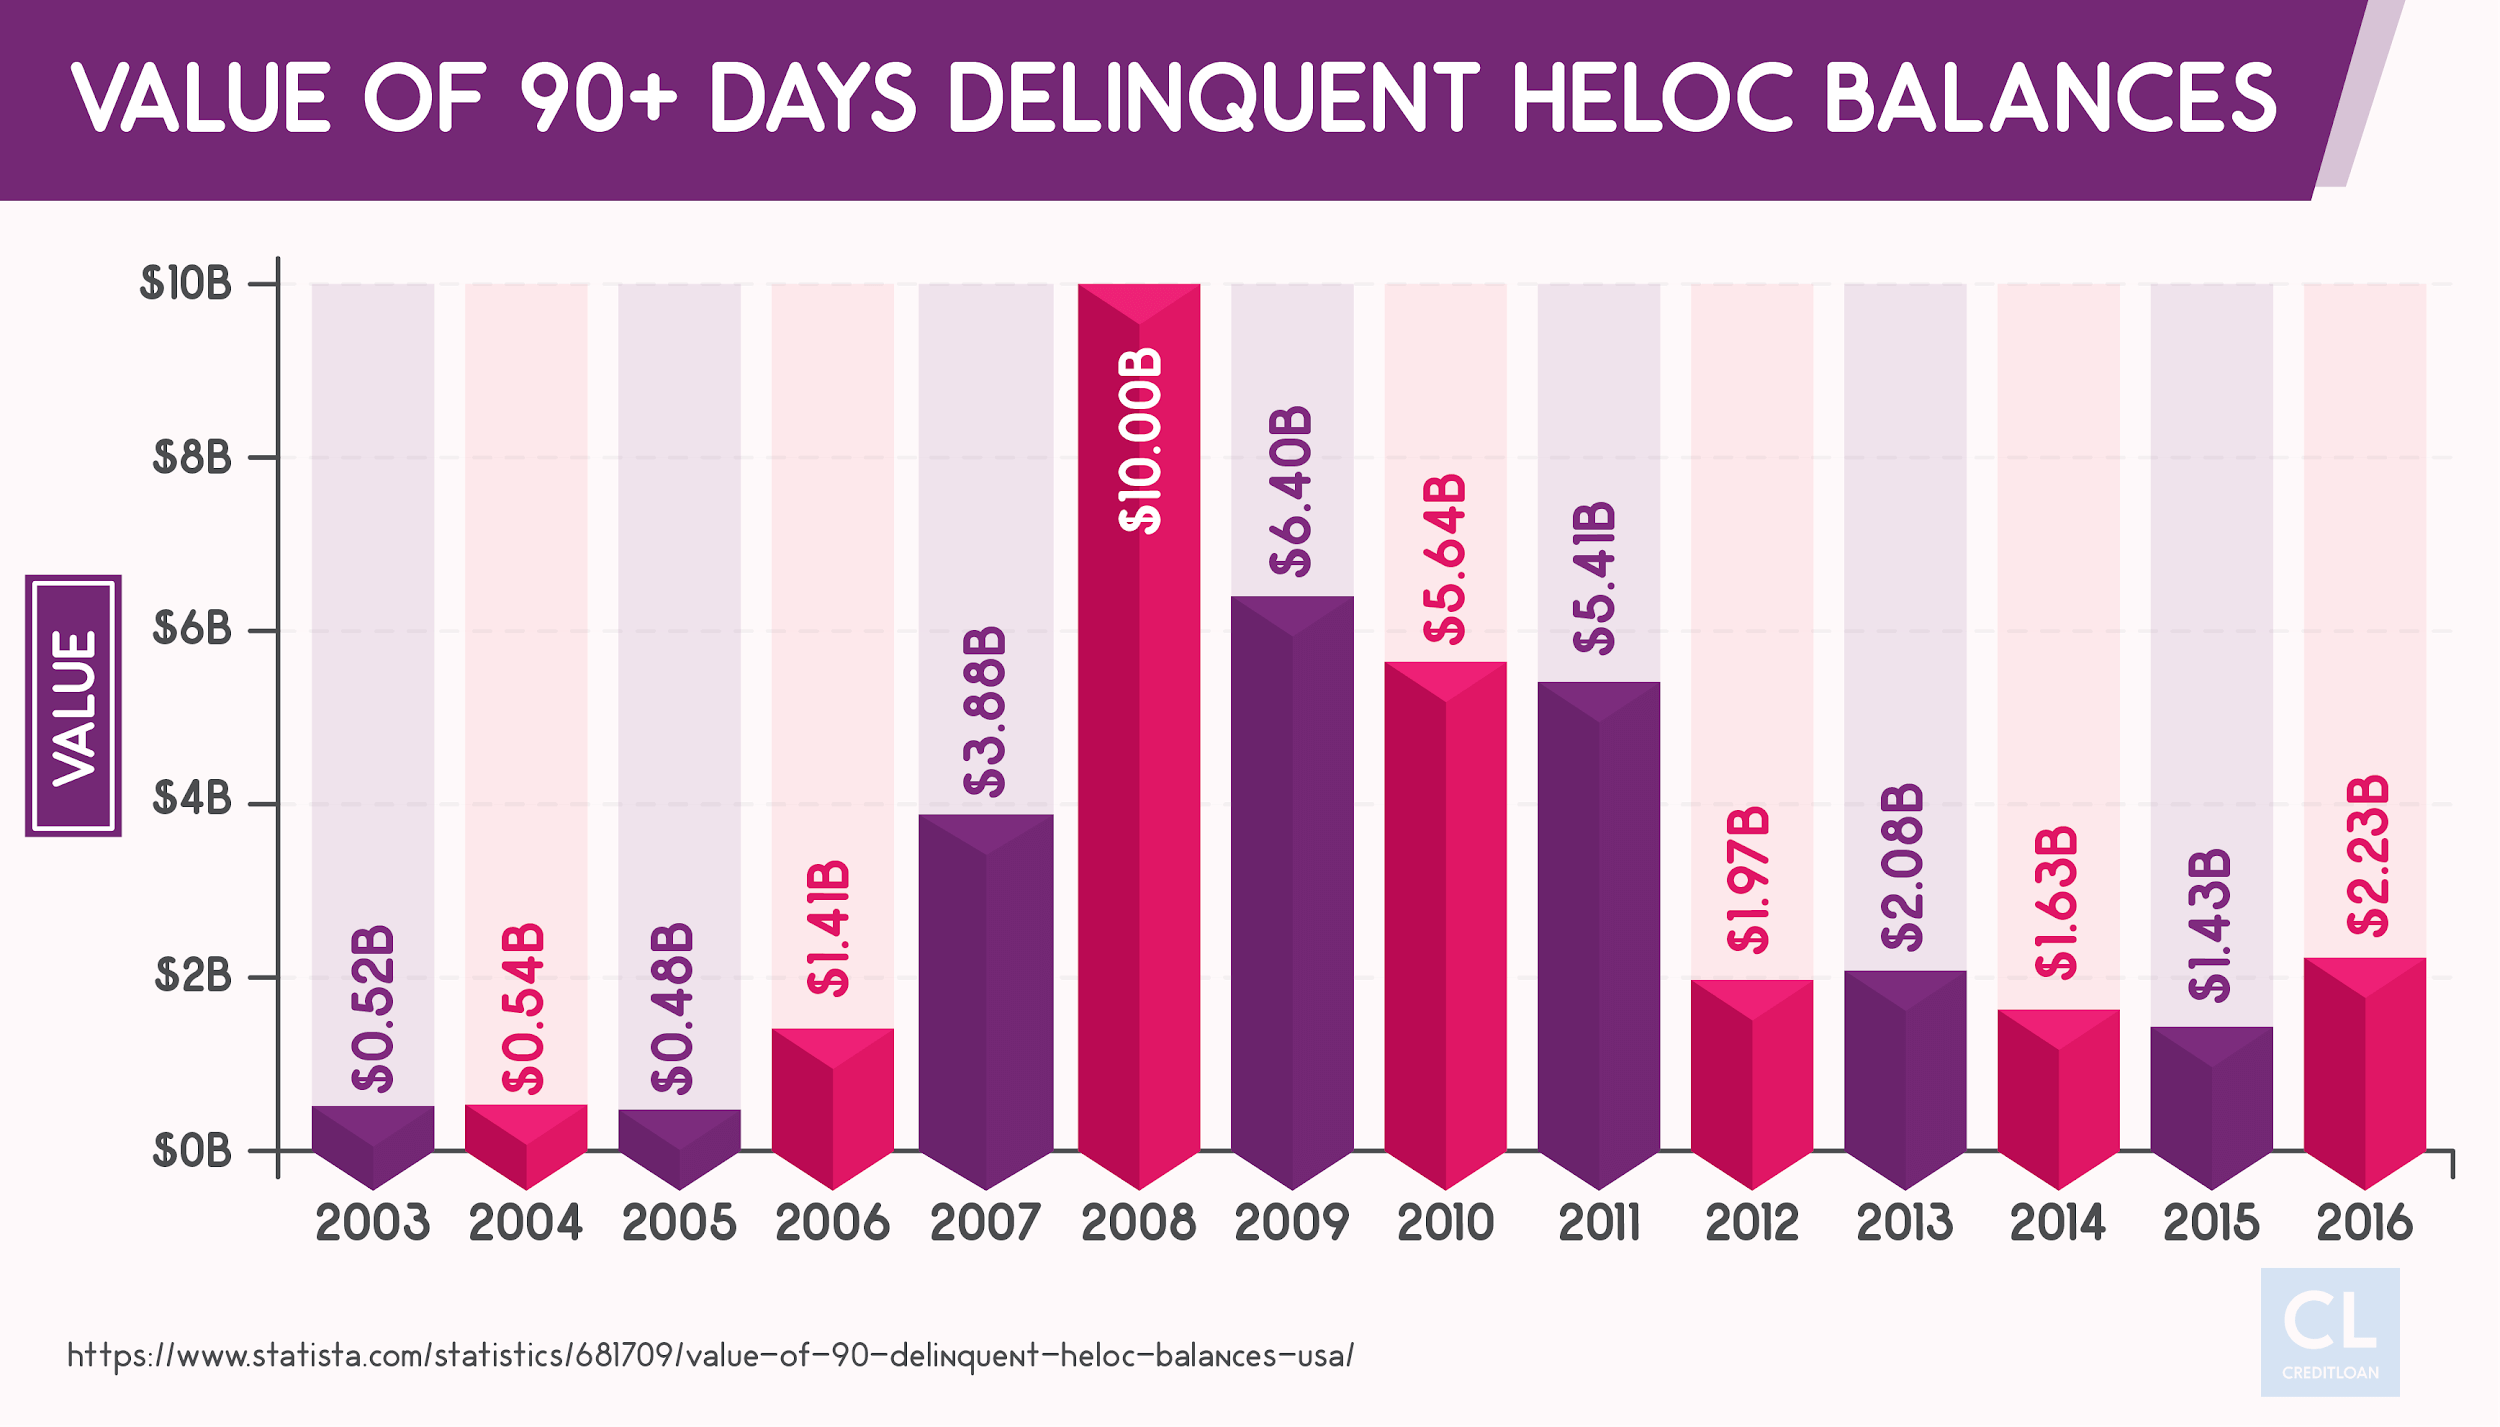 Value of 90+ Days Delinquent HELOC Balances from 2003-2016